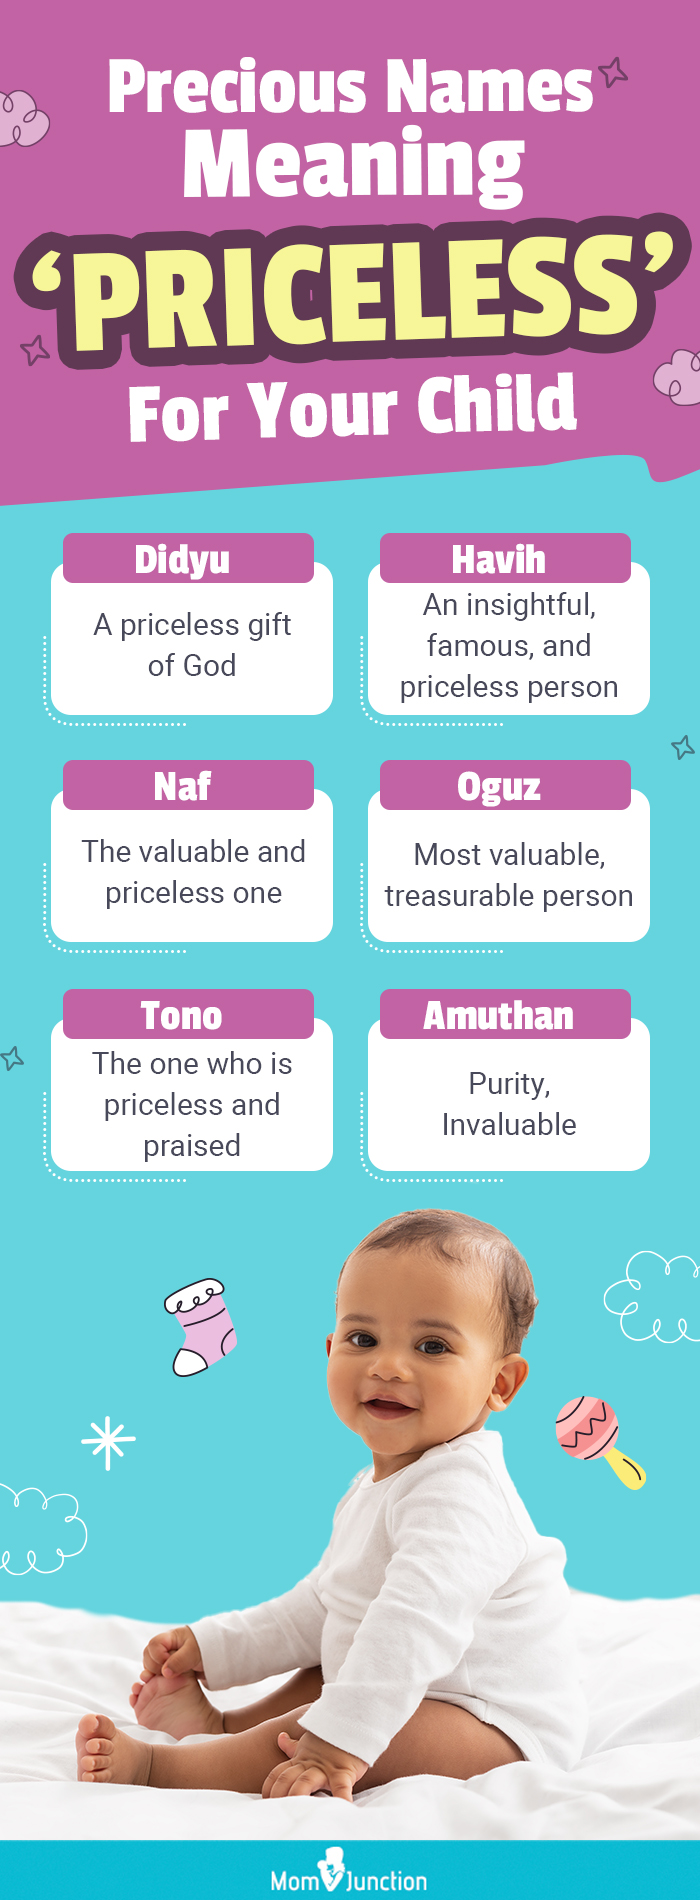 precious names meaning priceless for your child (infographic)